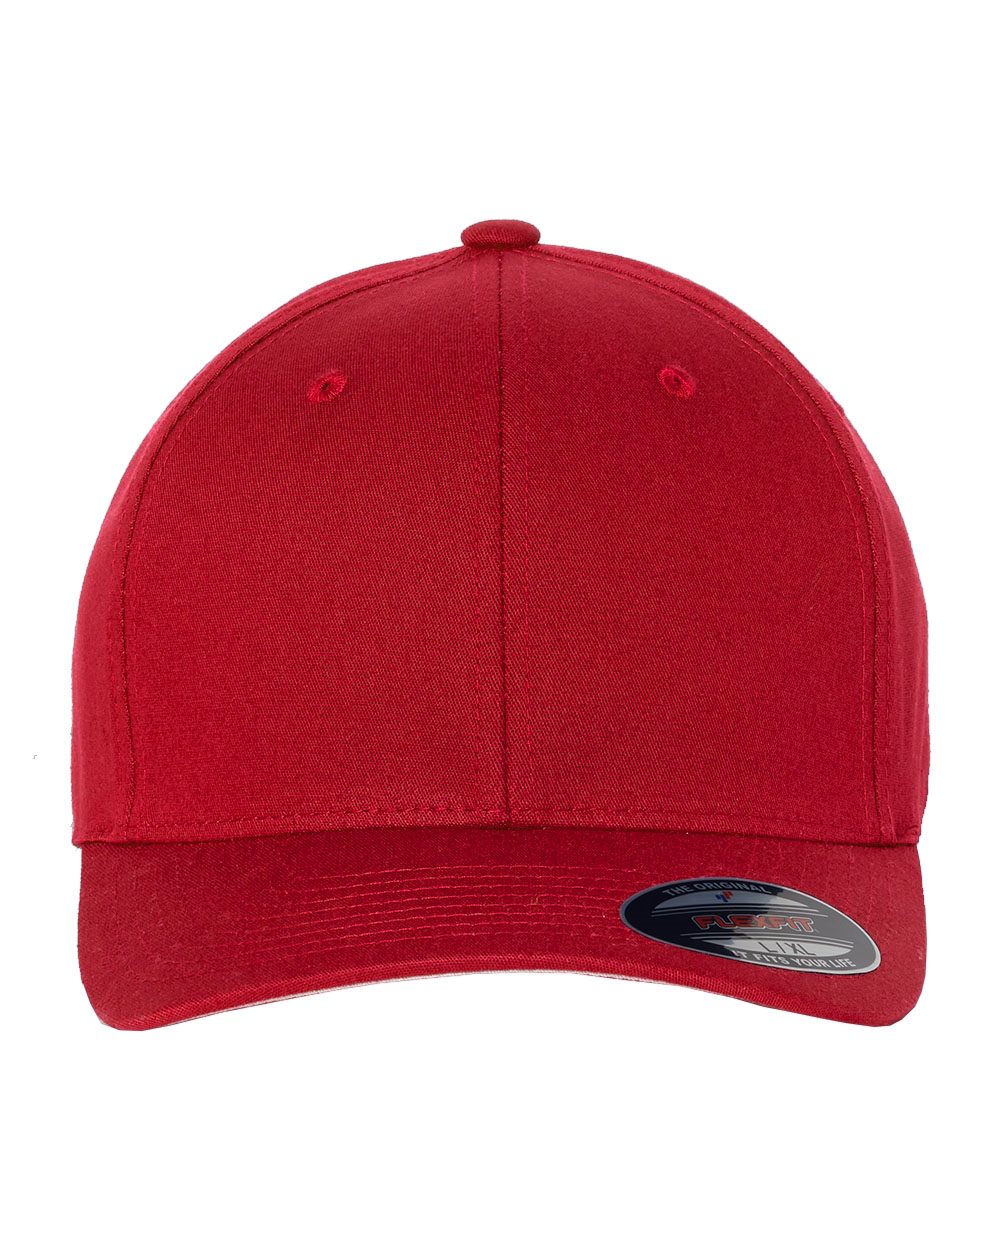 Custom Embroidered V-Flexfit® Cotton Twill Cap - 5001 - Caps To You